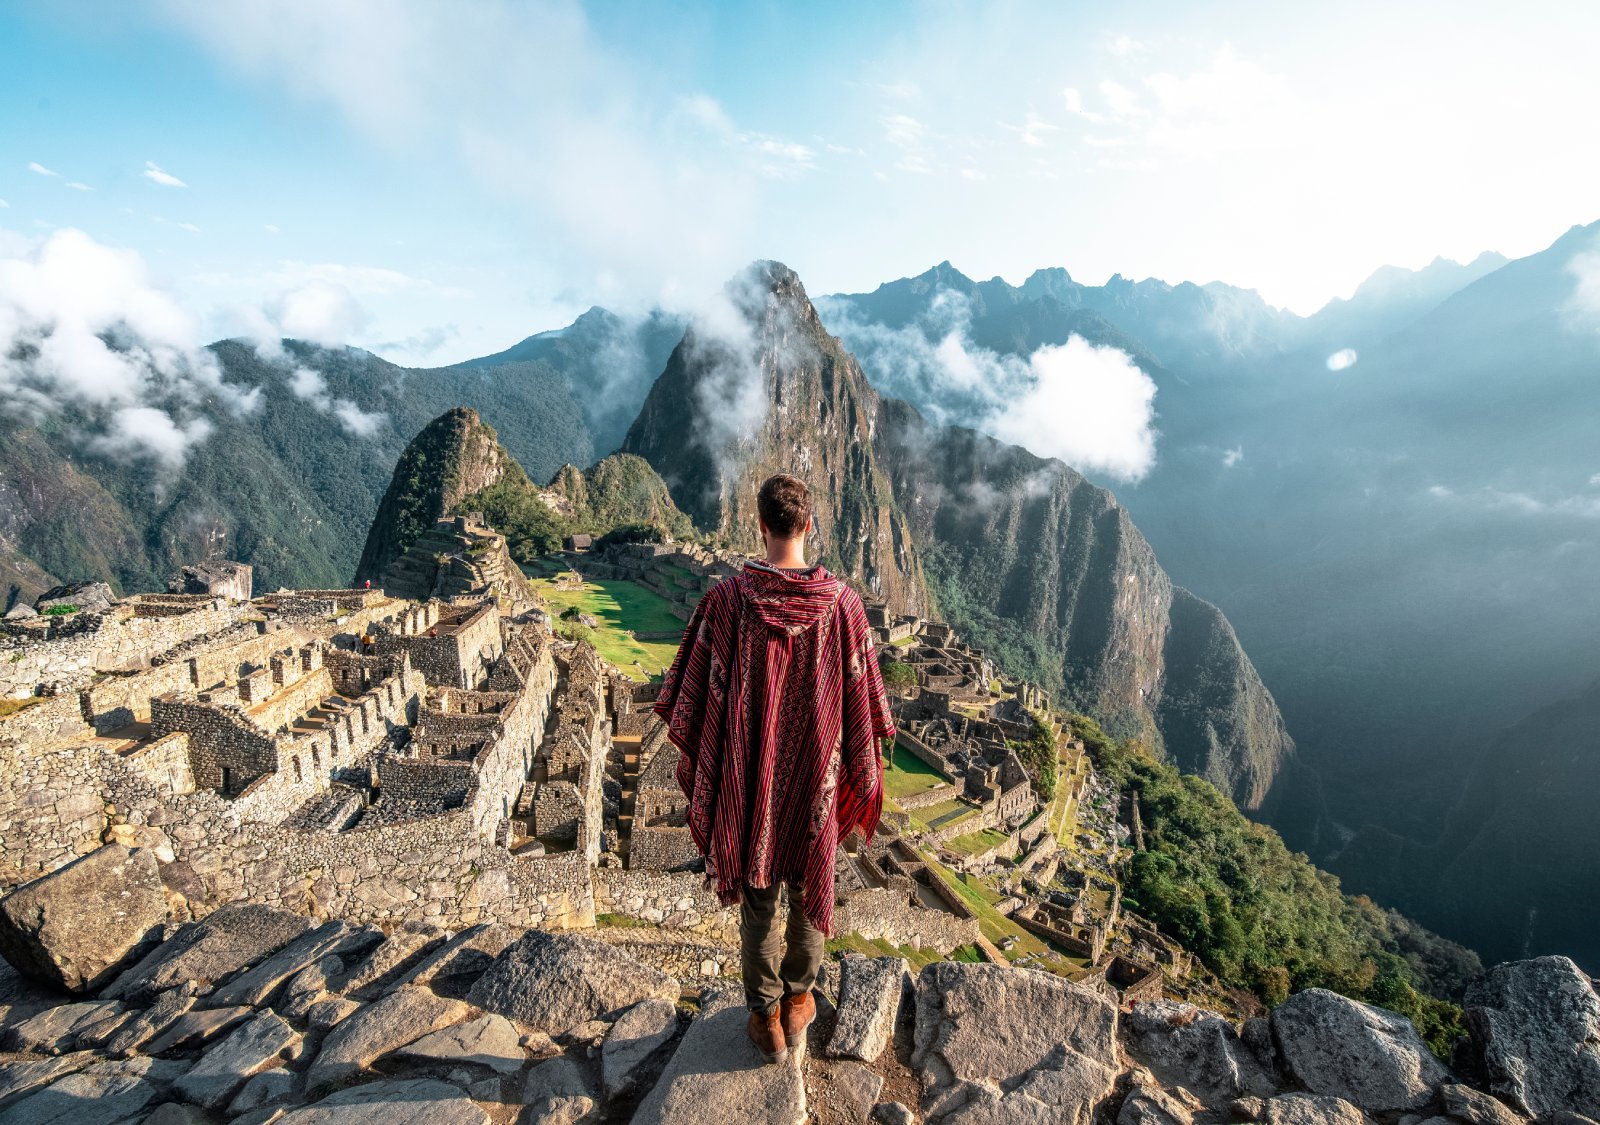 <p><span>Machu Picchu, the ancient Incan city set high in the Andes, is a must-visit for any solo traveler in South America. The journey to Machu Picchu, whether by train or through a multi-day trek like the Inca Trail, is as remarkable as the destination.</span></p> <p><span>The site offers an extraordinary insight into Incan history and stunning panoramic views. For solo travelers, it’s a chance to join group tours where you can meet like-minded adventurers.</span></p> <p><b>Insider’s Tip: </b><span>Book your Inca Trail trek well in advance, as permits are limited and sell out quickly.</span></p> <p><b>When to Travel: </b><span>The dry season from May to October is the best time to visit, with clearer skies and less rain.</span></p> <p><b>How to Get There: </b><span>Fly into Cusco from Lima, then take a train or join a trekking group to Machu Picchu.</span></p>